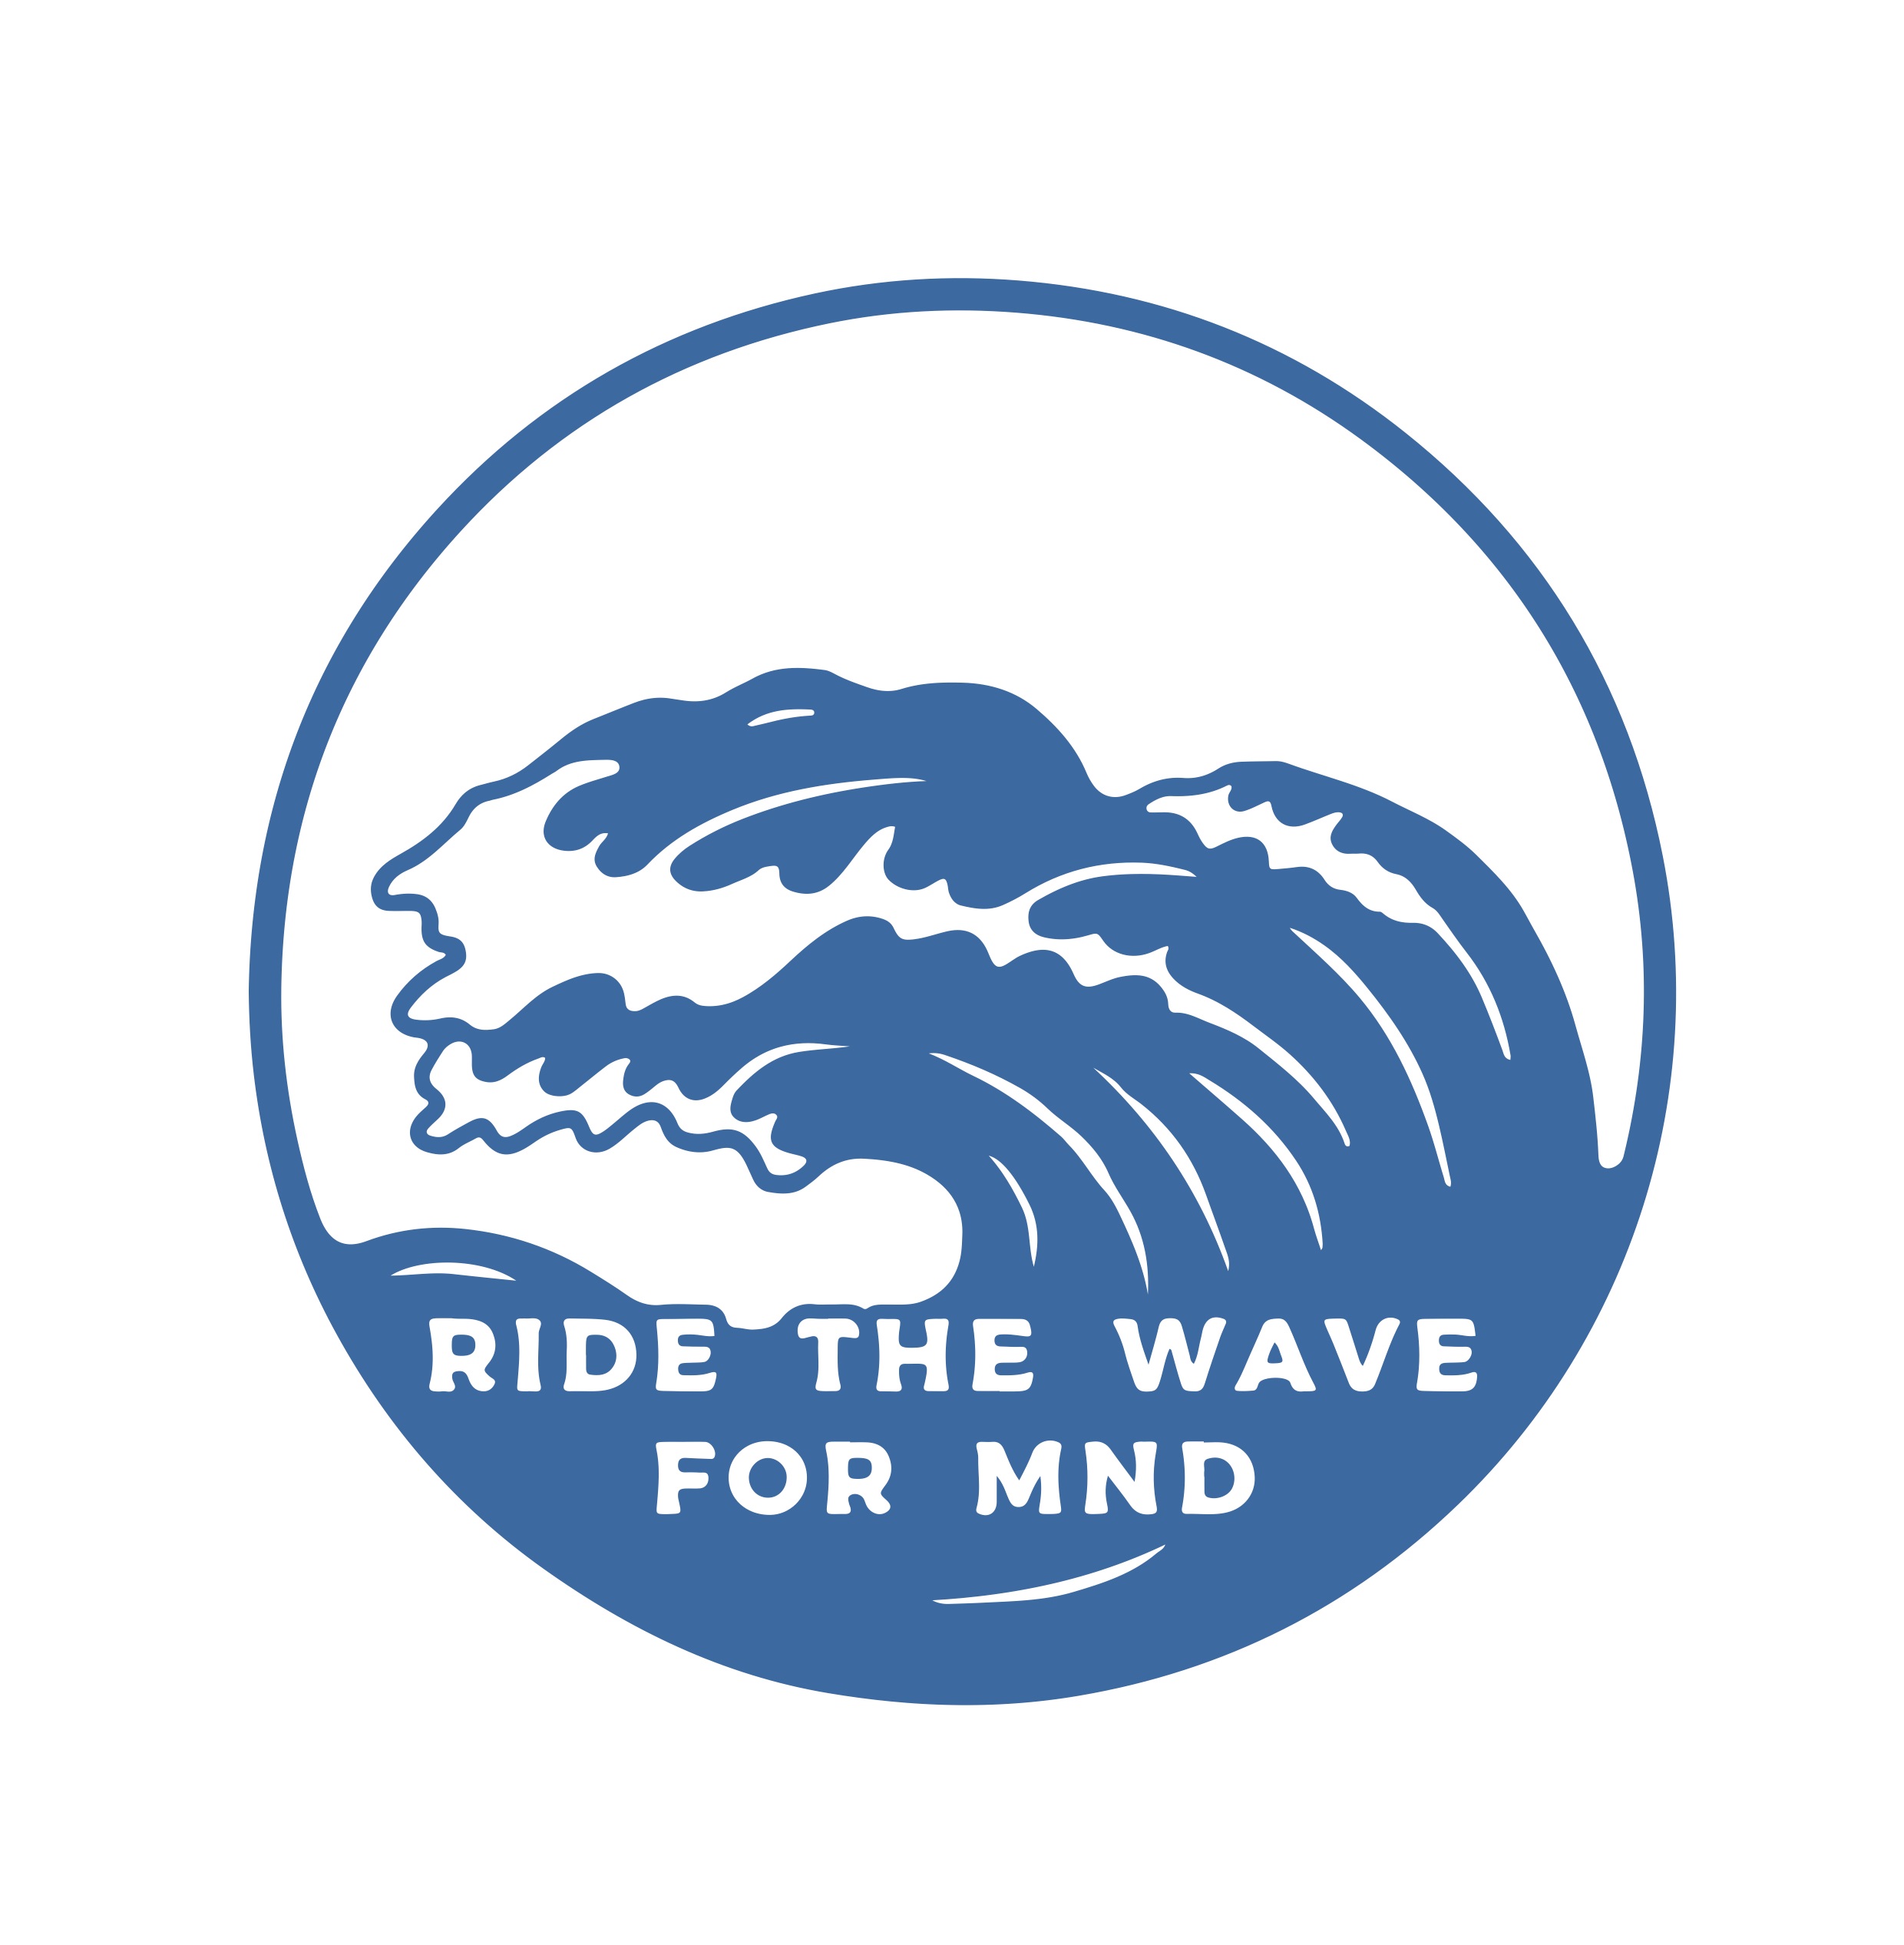 Ride The Wave For MND